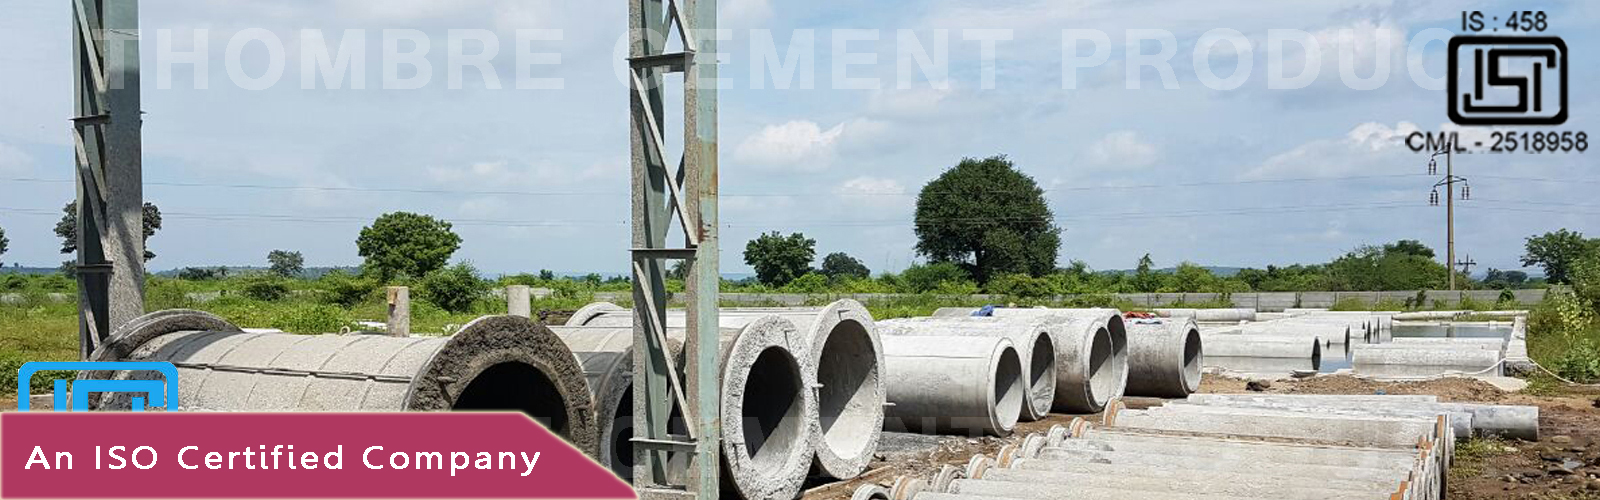 rcc Pipes in nagpur | Cement Pipes and electric poles in Nagpur